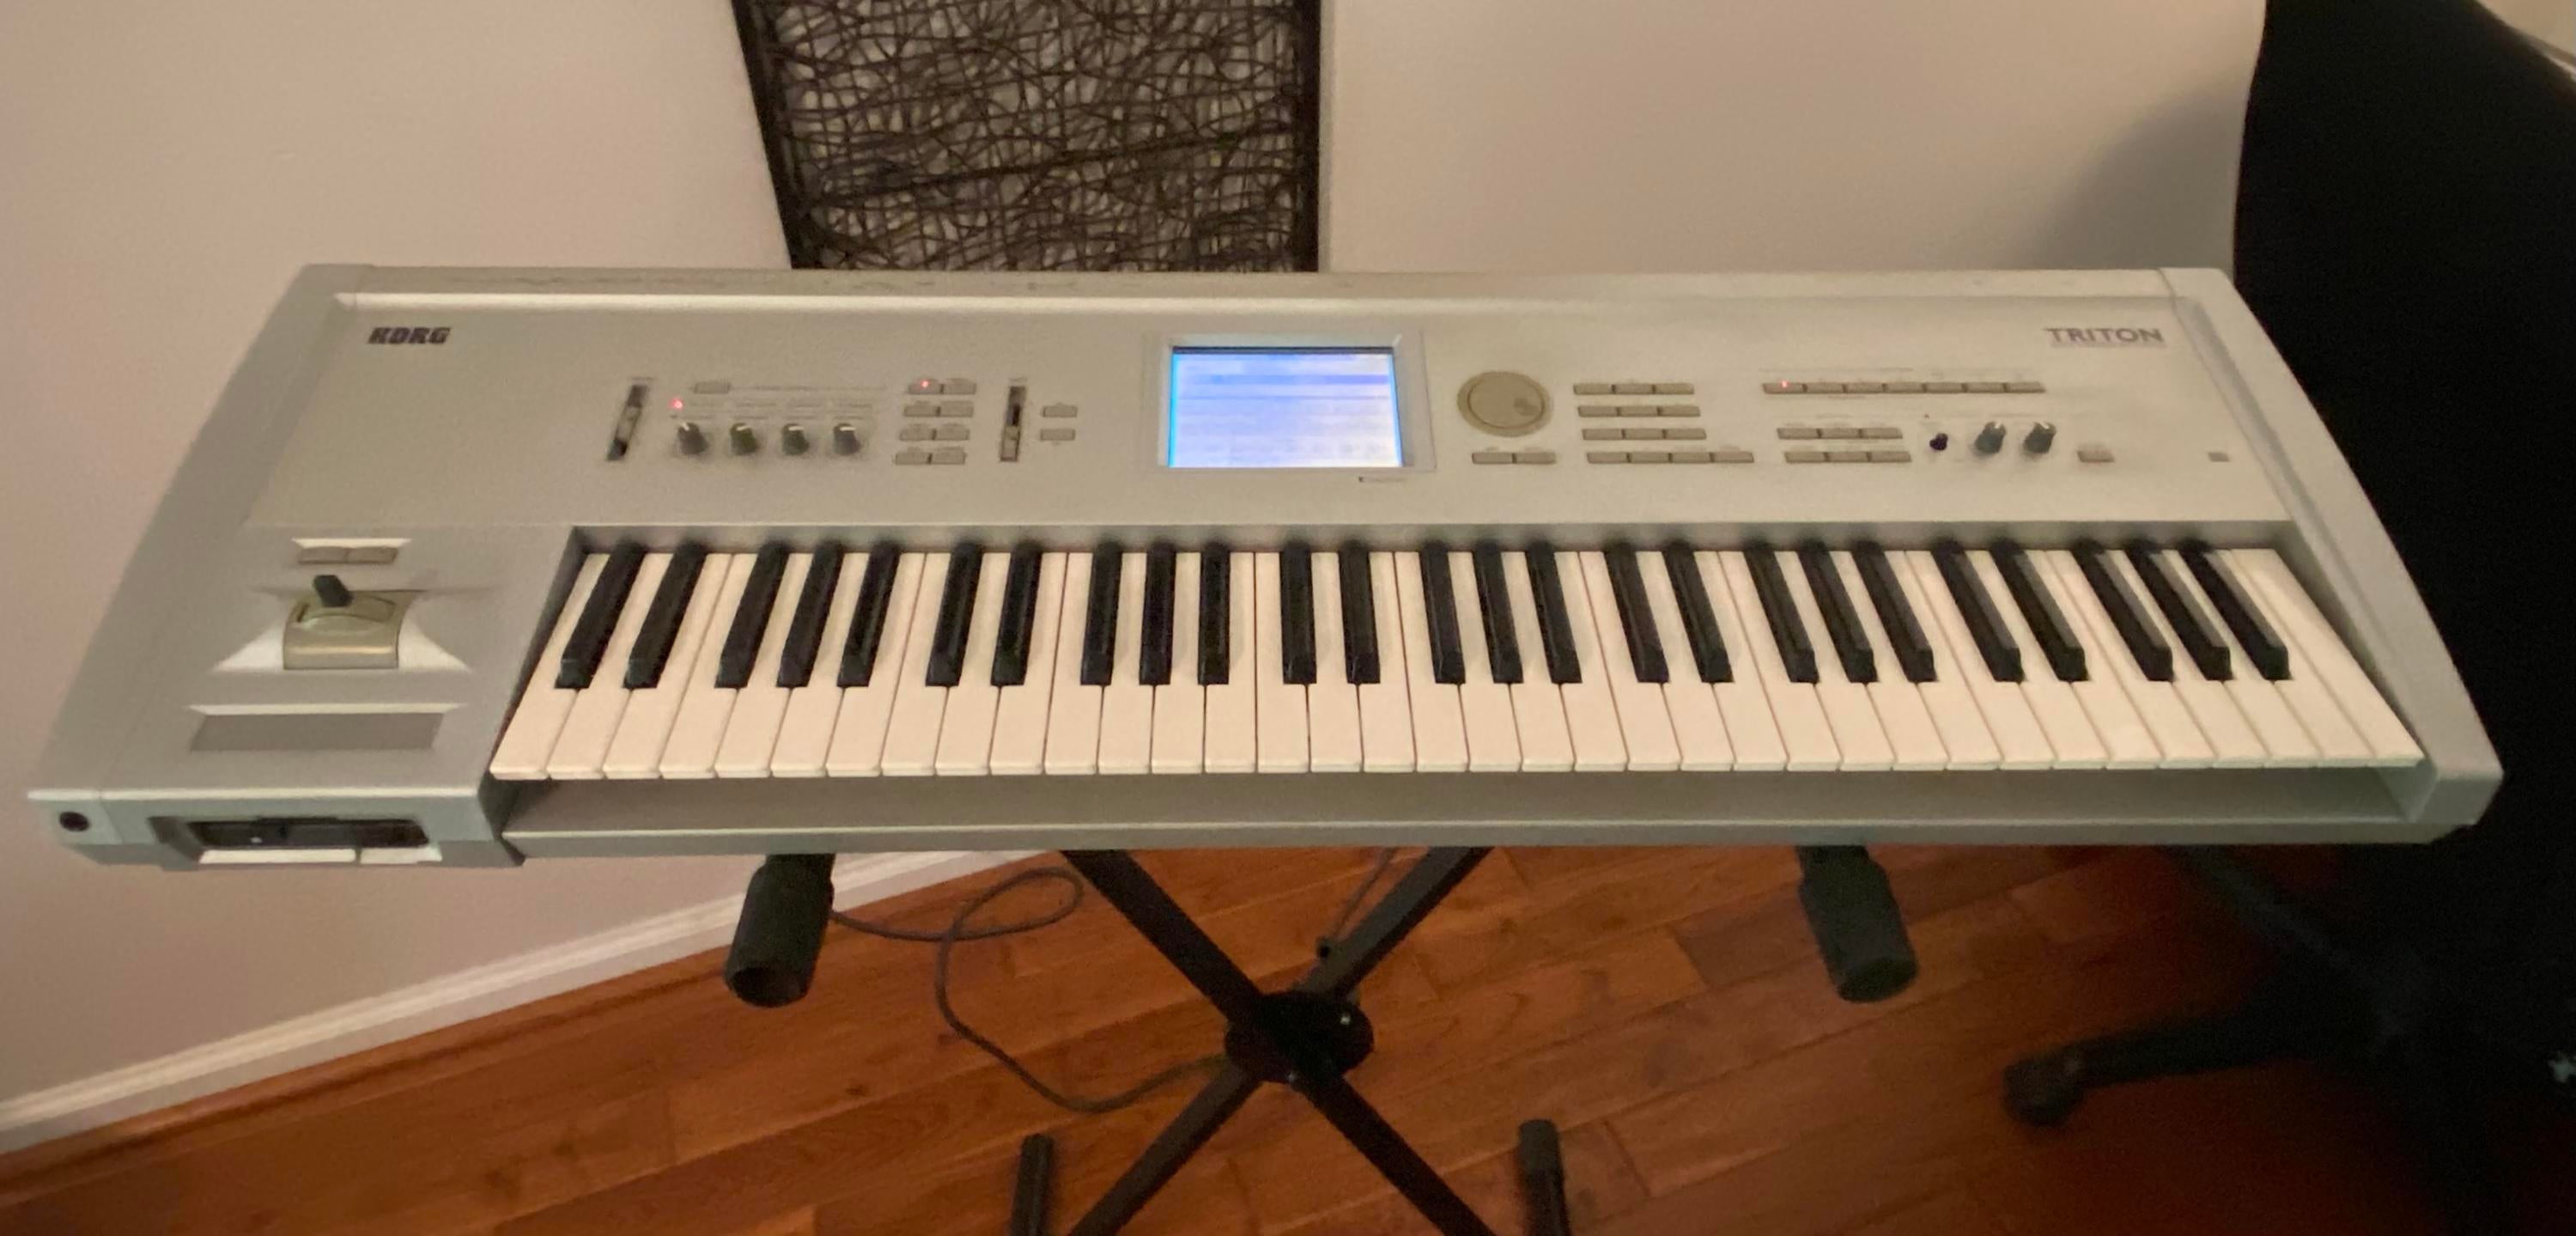 Used Korg Triton 61-Key 62-Voice Polyphonic - Sweetwater's Gear